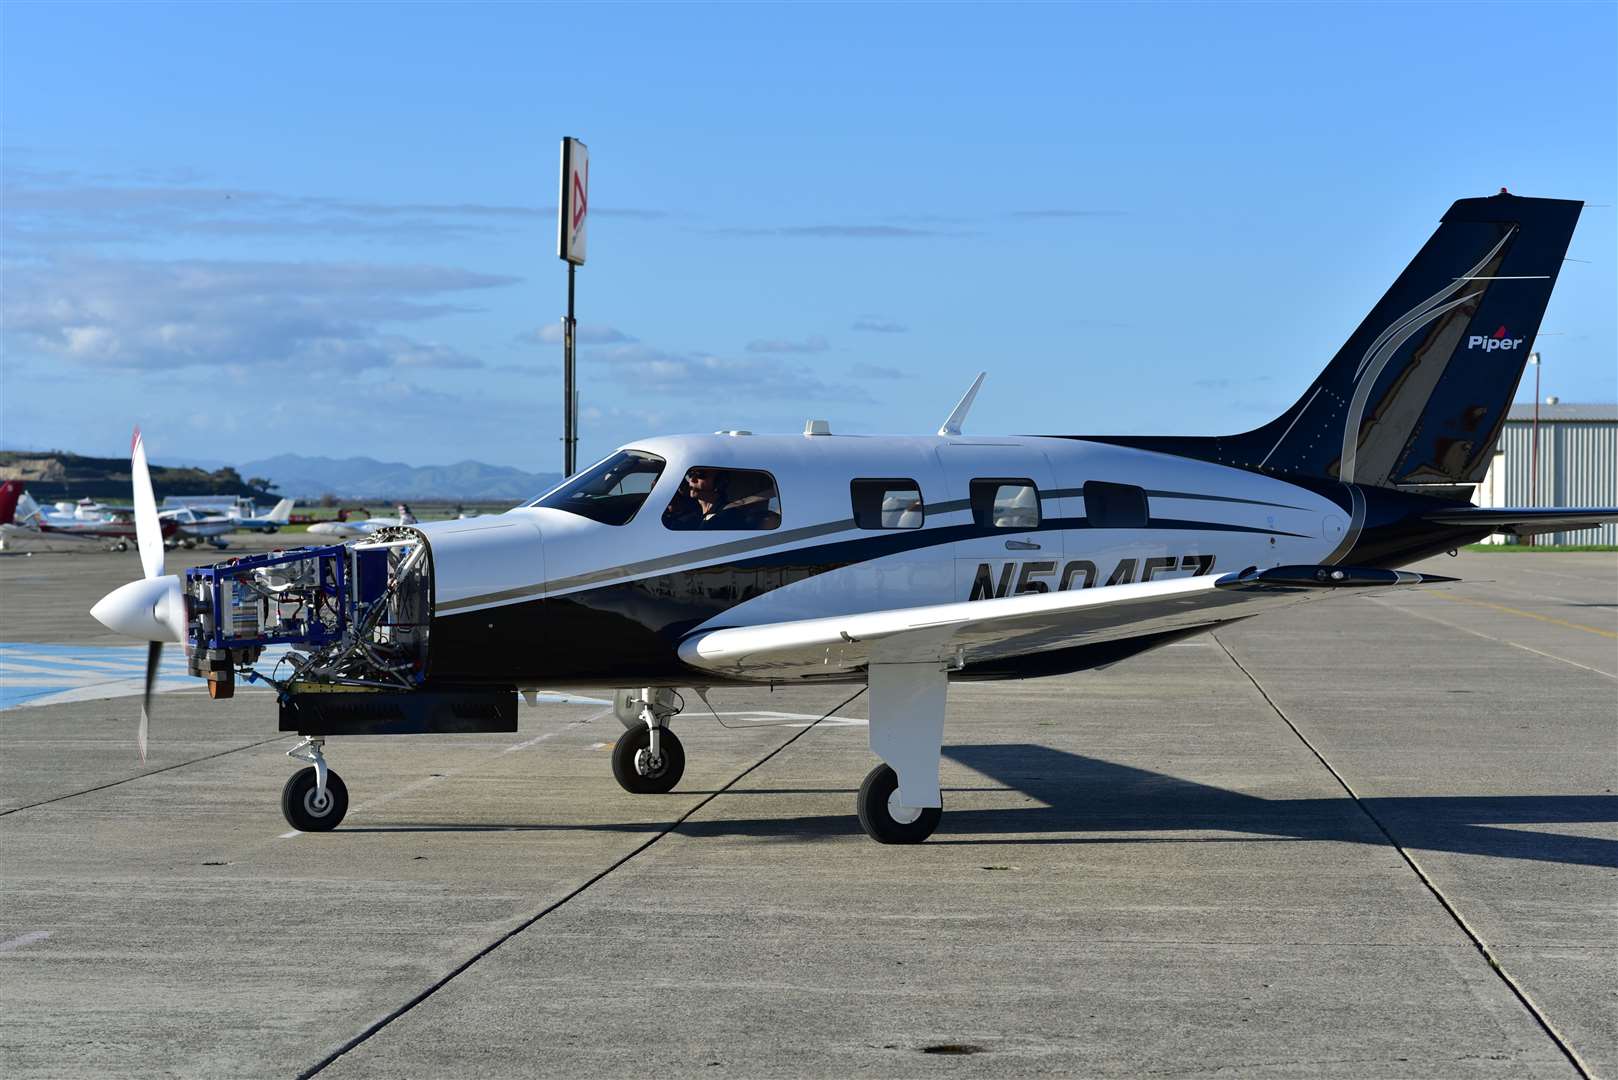 ZeroAvia’s Piper M-class six-seater aircraft to be used in HyFlyer flight tests. Picture: ZeroAvia